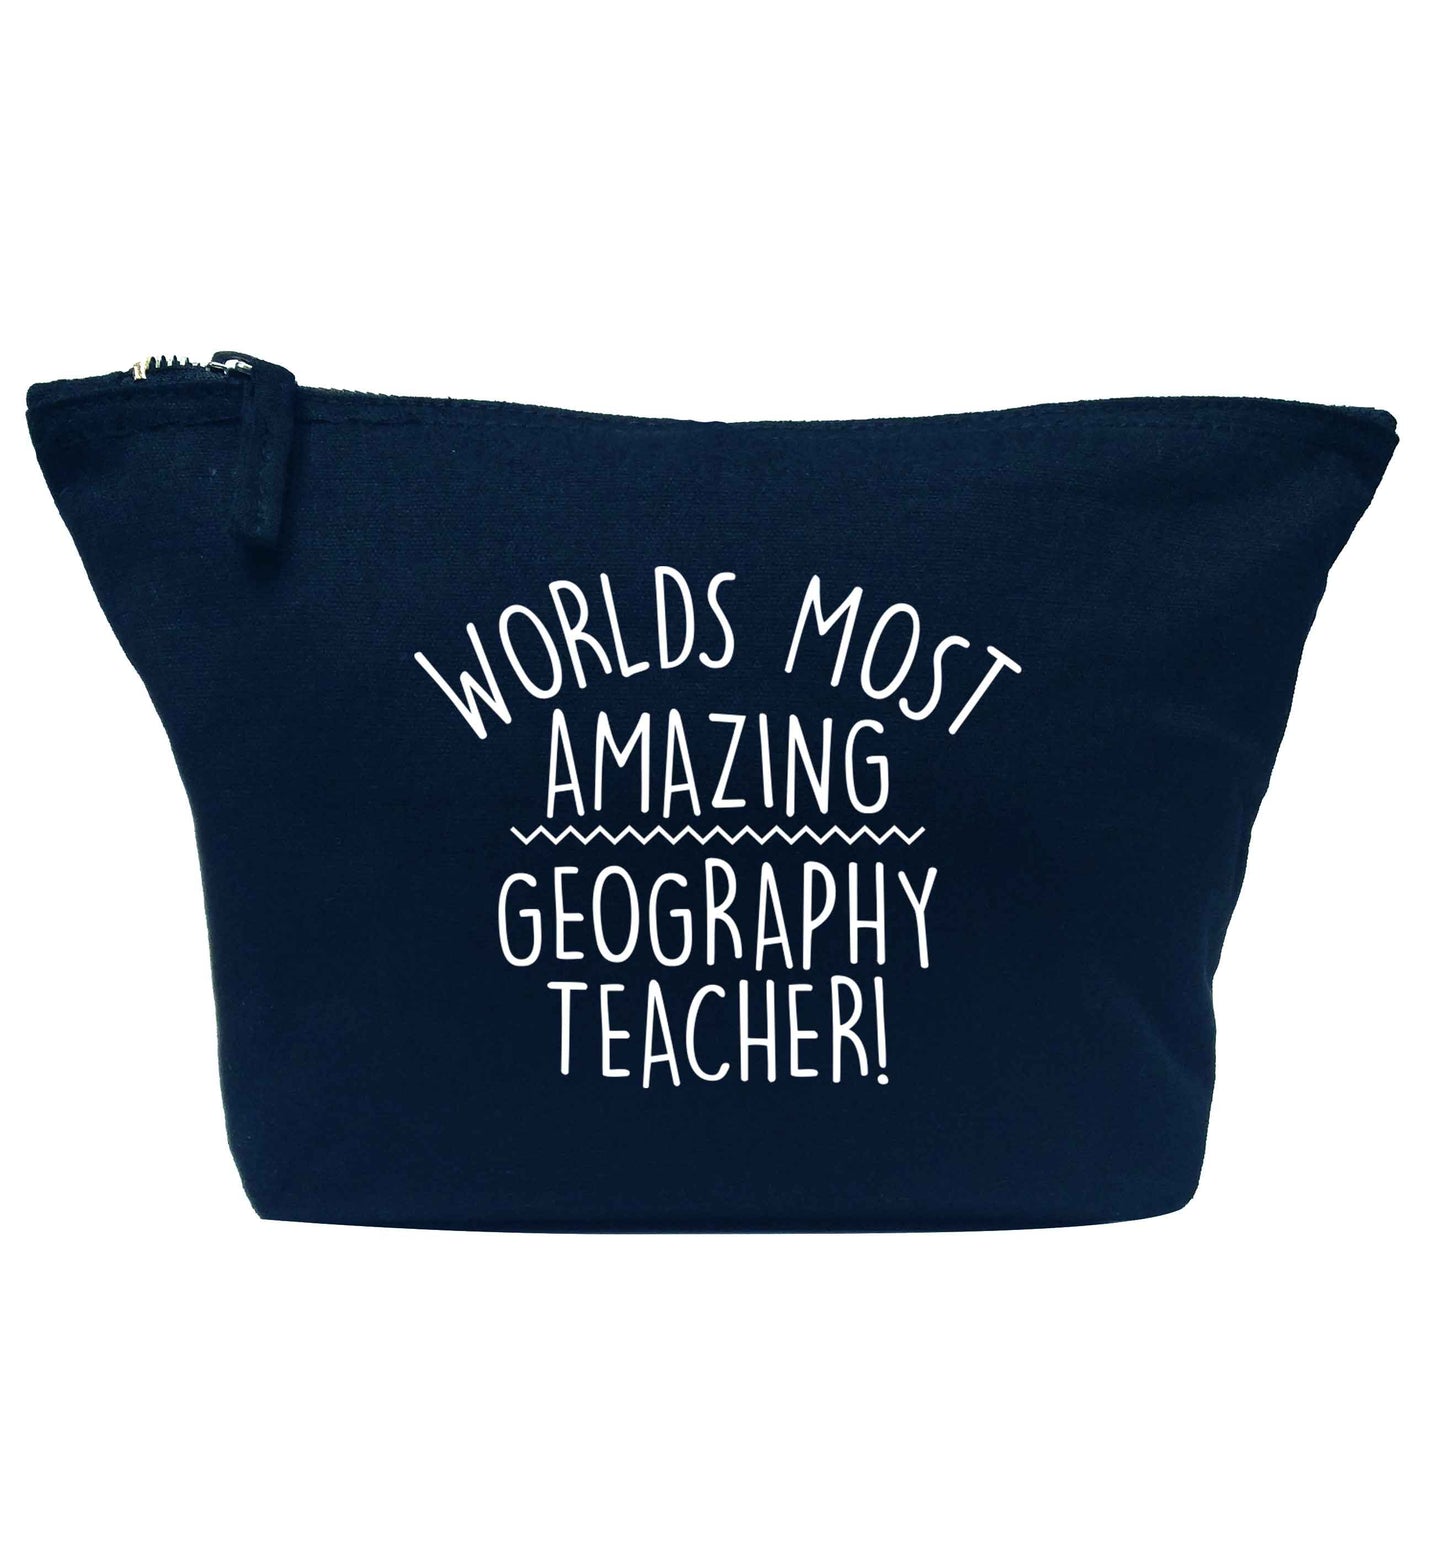 Worlds most amazing geography teacher navy makeup bag